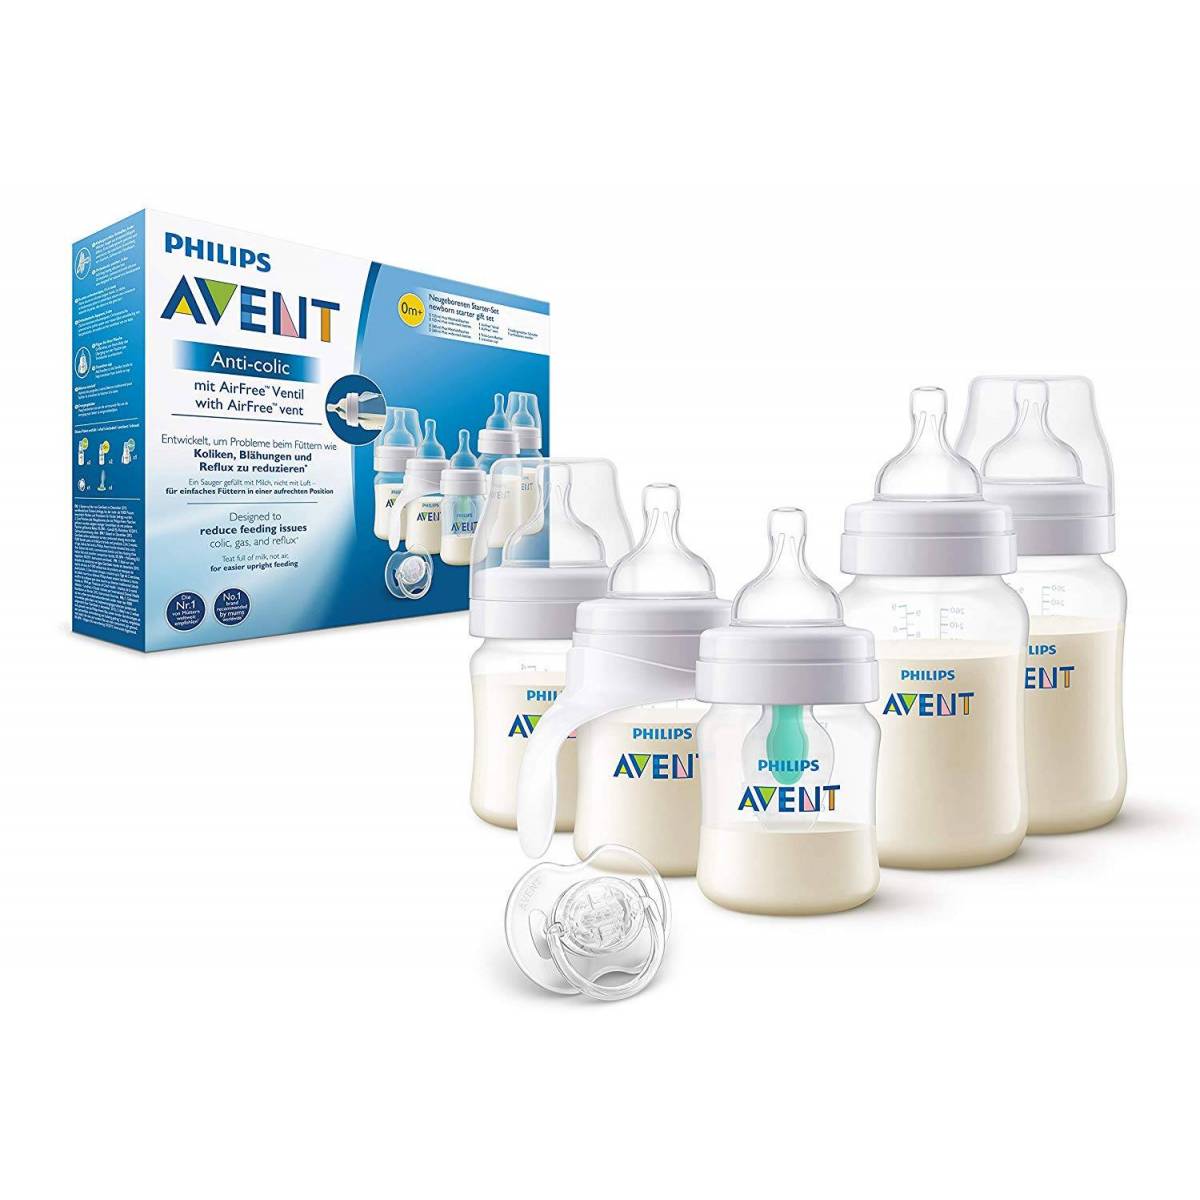 Philips Avent Anti Colic Scalable Baby Bottle Box